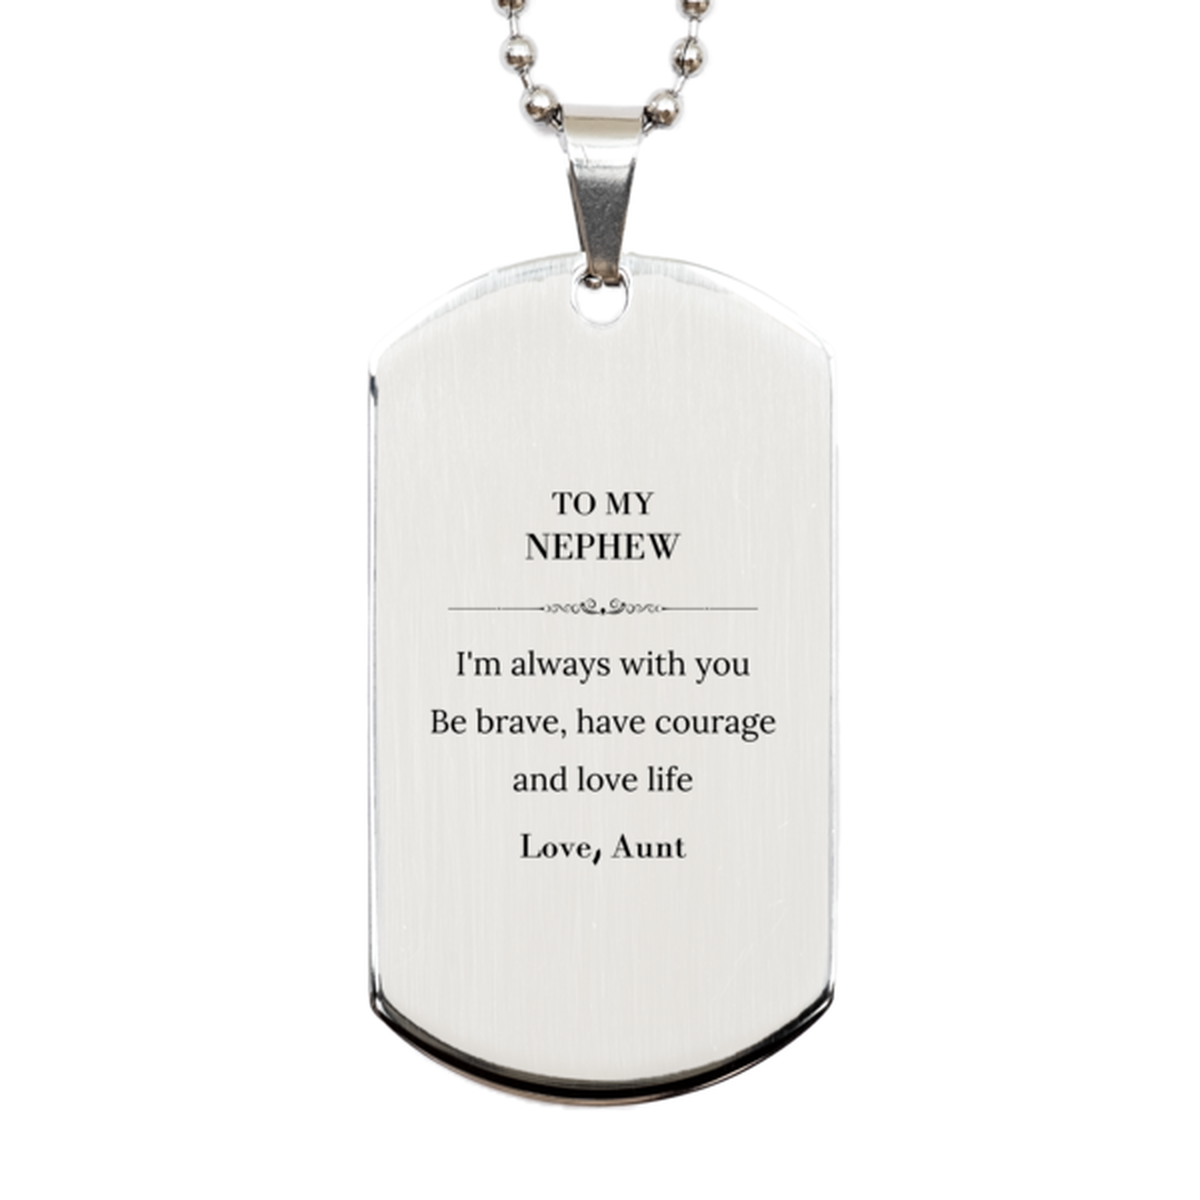 To My Nephew Gifts from Aunt, Unique Silver Dog Tag Inspirational Christmas Birthday Graduation Gifts for Nephew I'm always with you. Be brave, have courage and love life. Love, Aunt